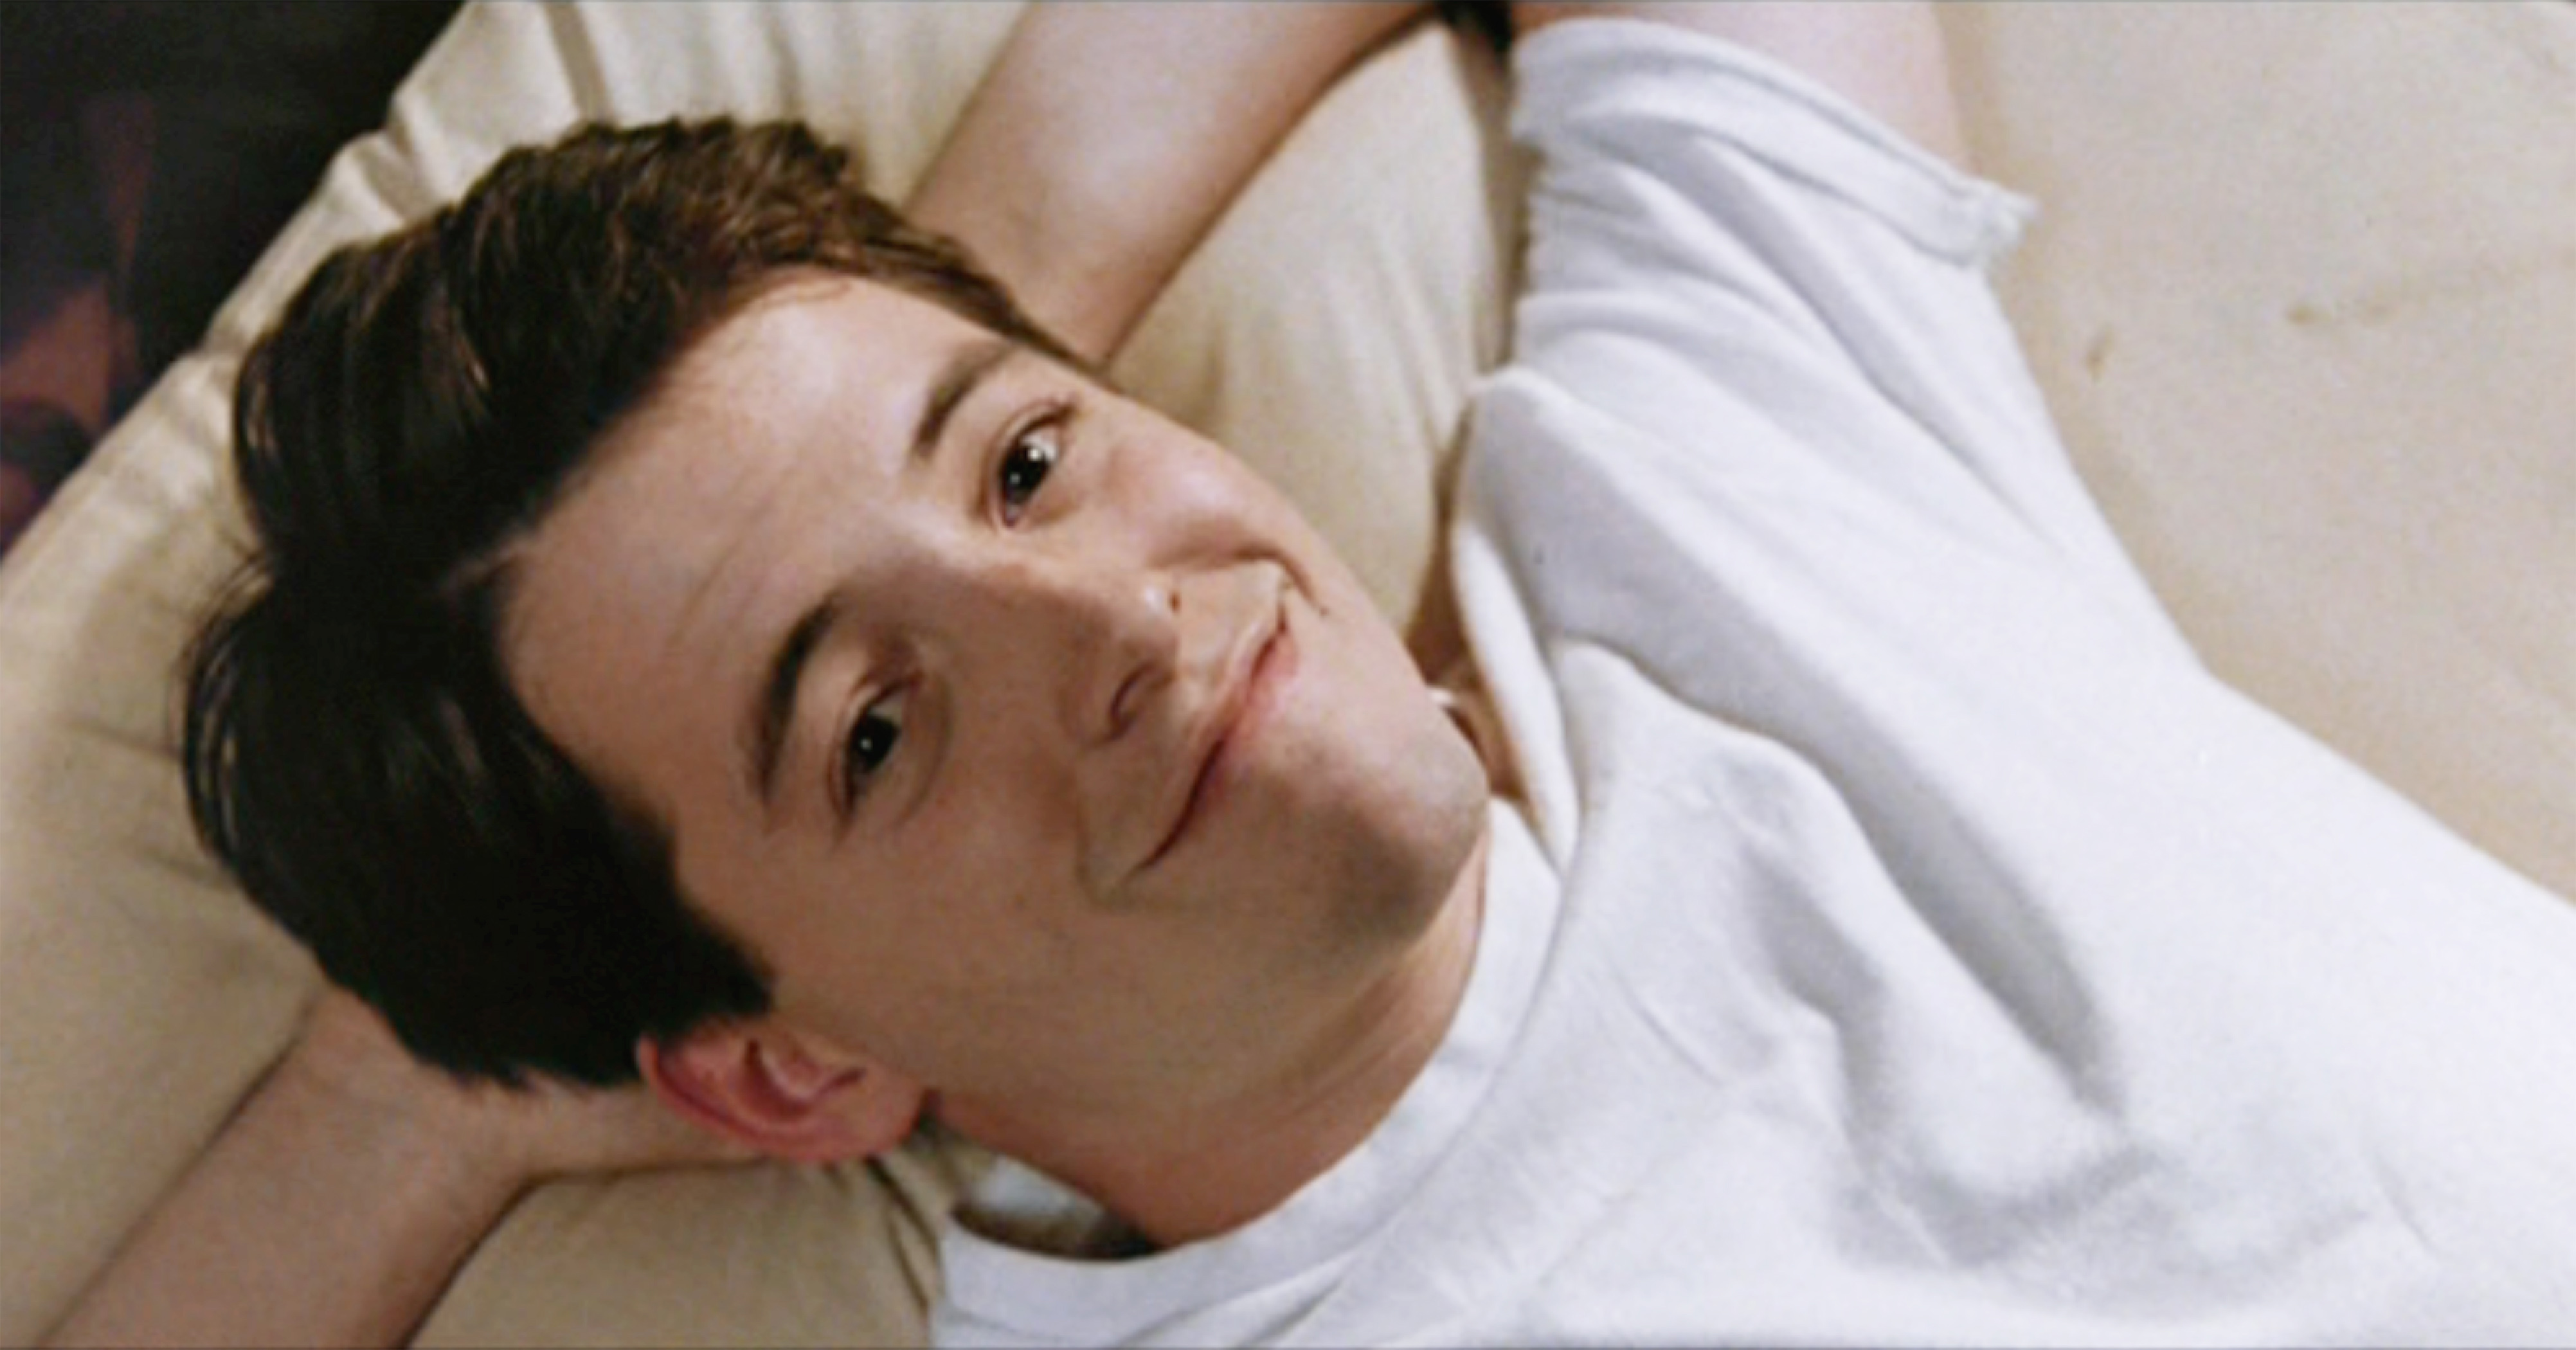 5 things I learned from Ferris Bueller's Day Off